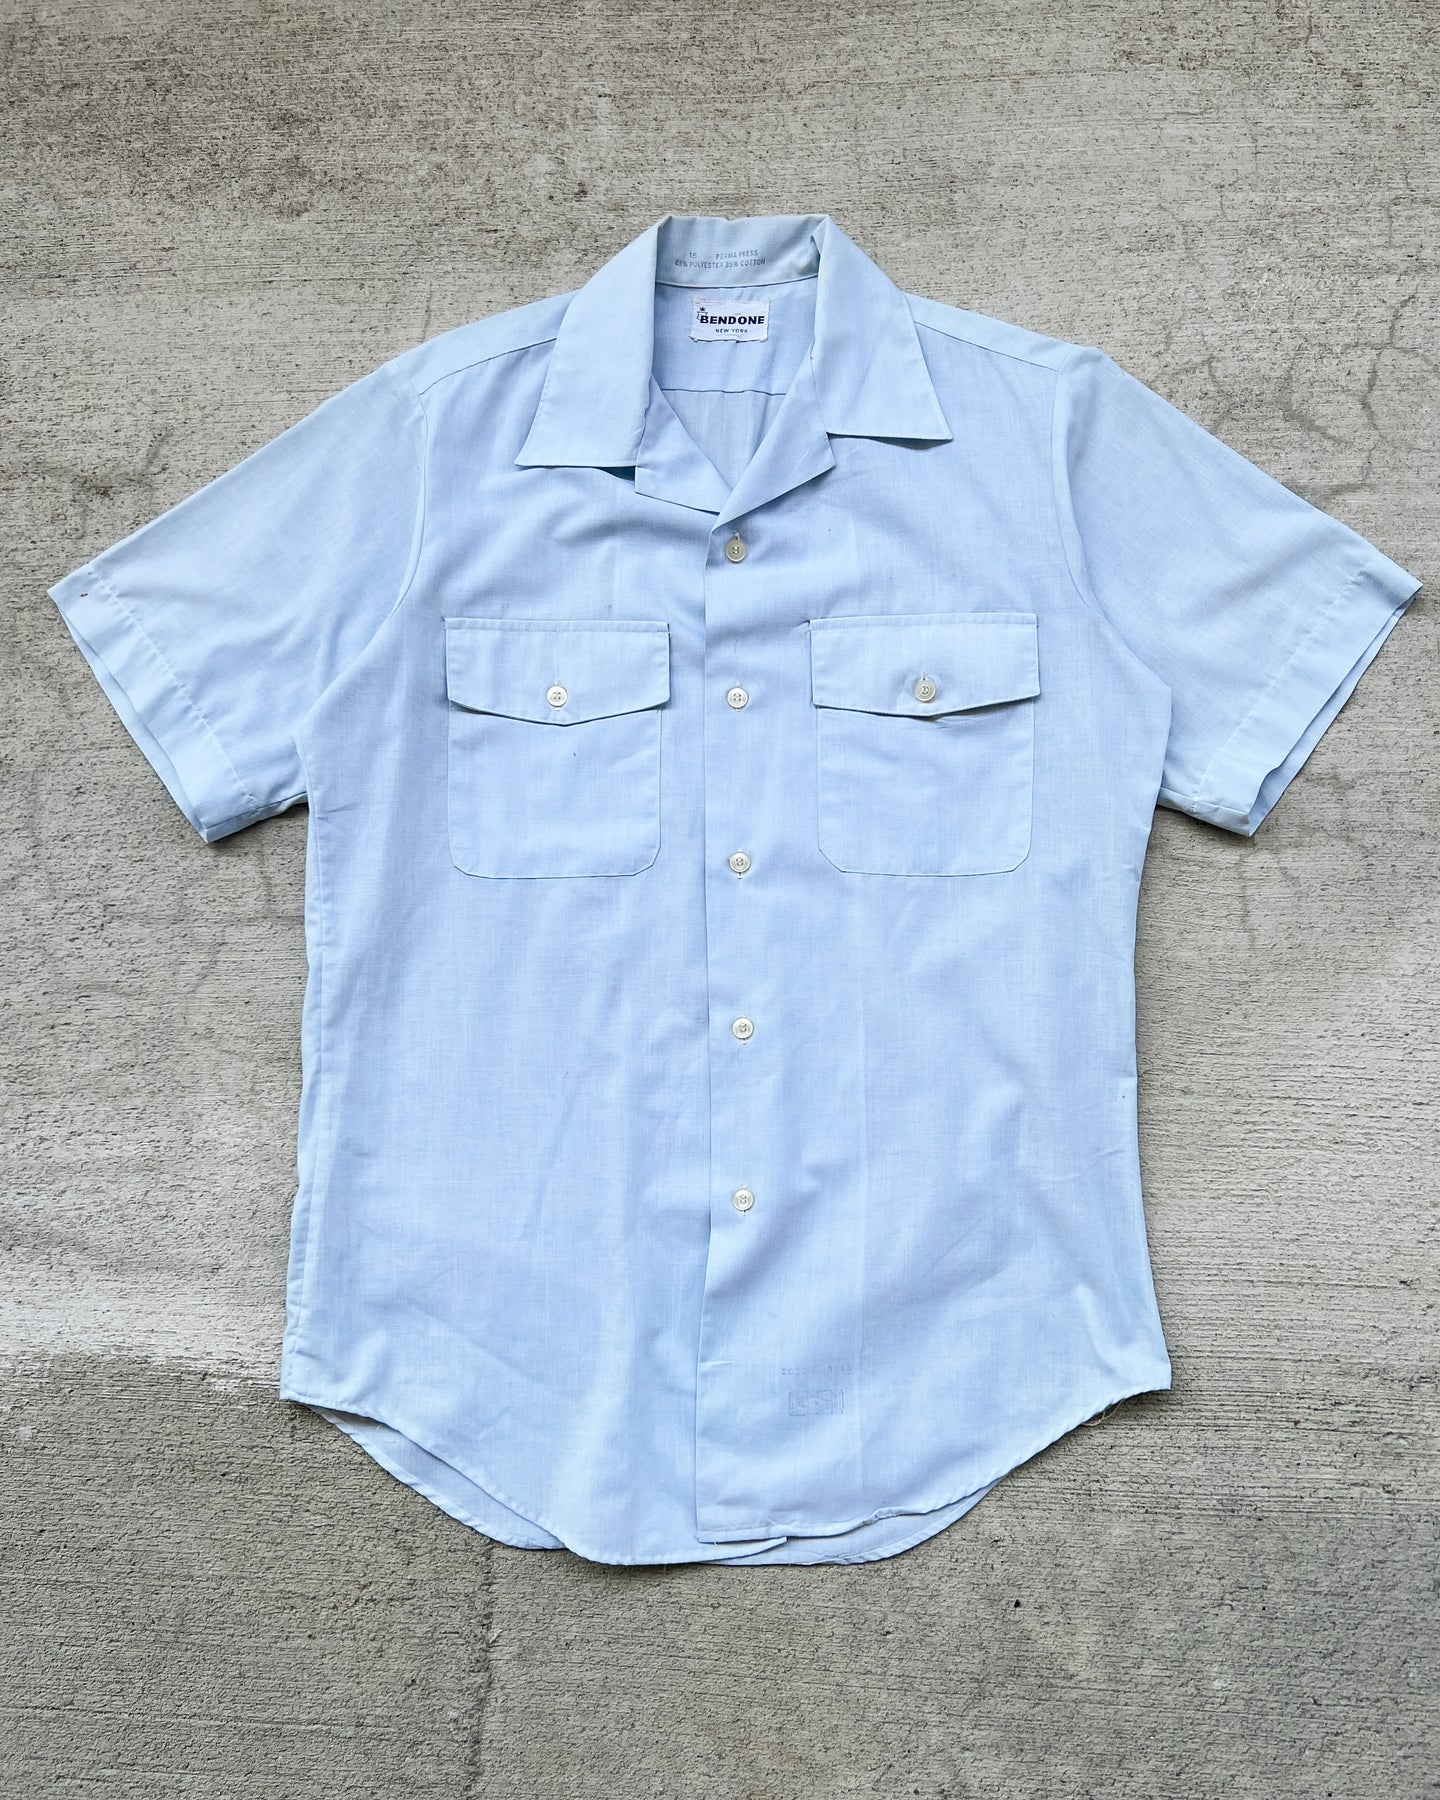 1960s Baby Blue Camp Collar Button Down Shirt - Size Large